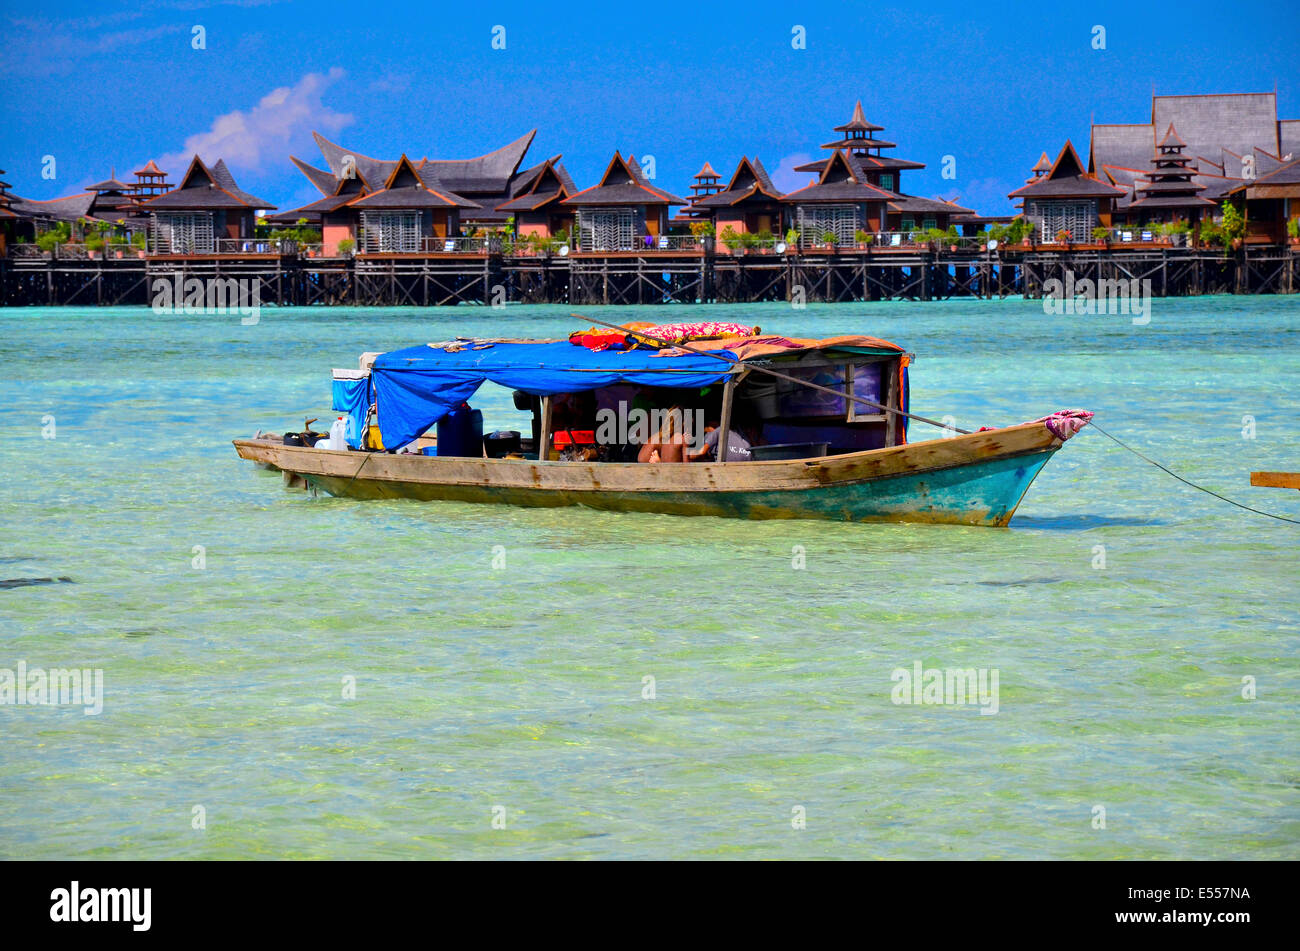 Bajau, sea nomads in traditional wooden boats, Celebes Sea, Malaysia, Stock Photo